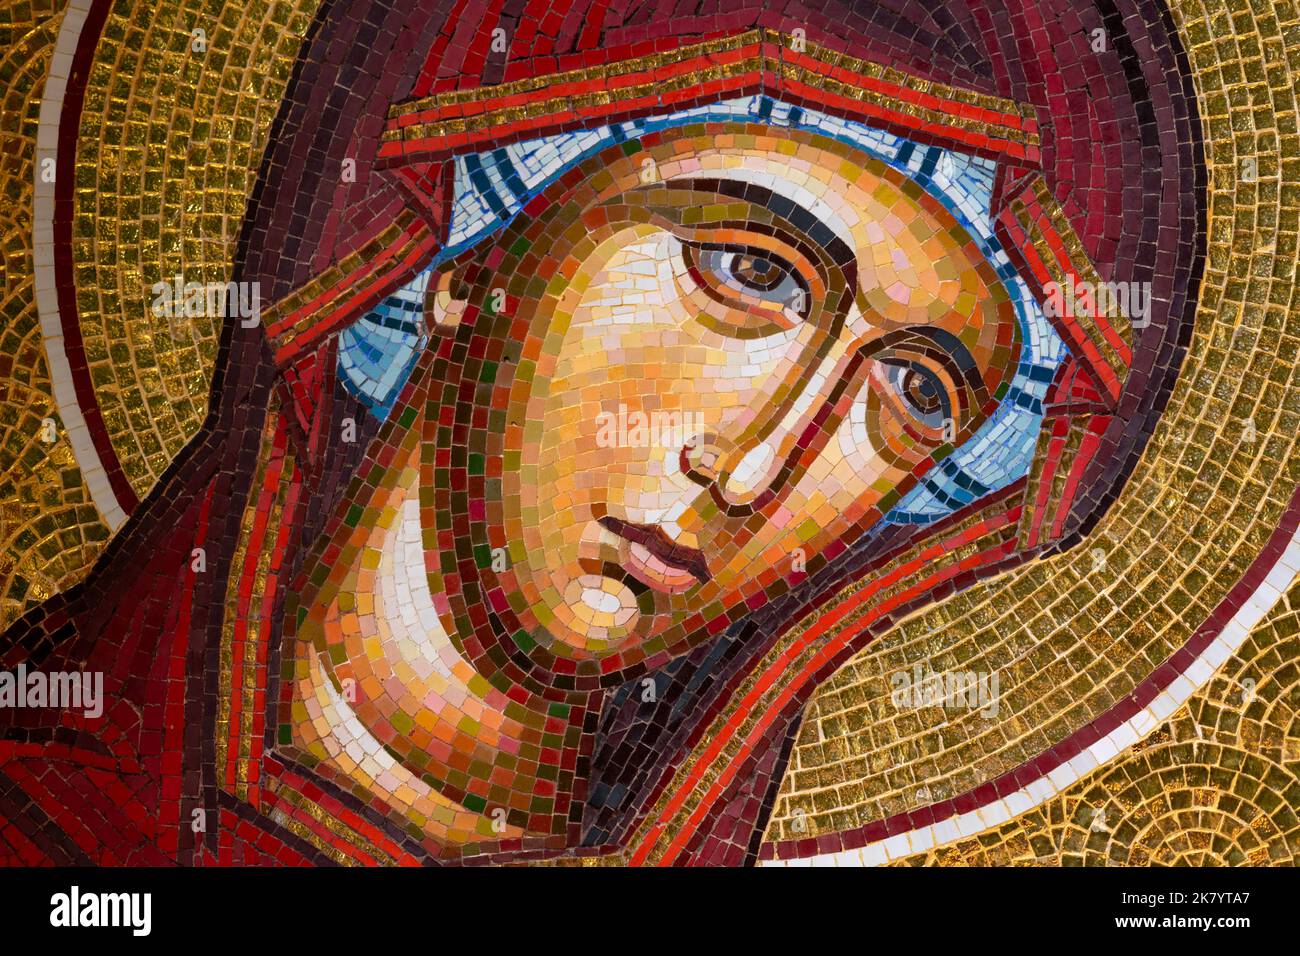 Detail of byzantine or orthodox mosaic icon depicting the head of Virgin Mary. Great for Easter needs. Stock Photo